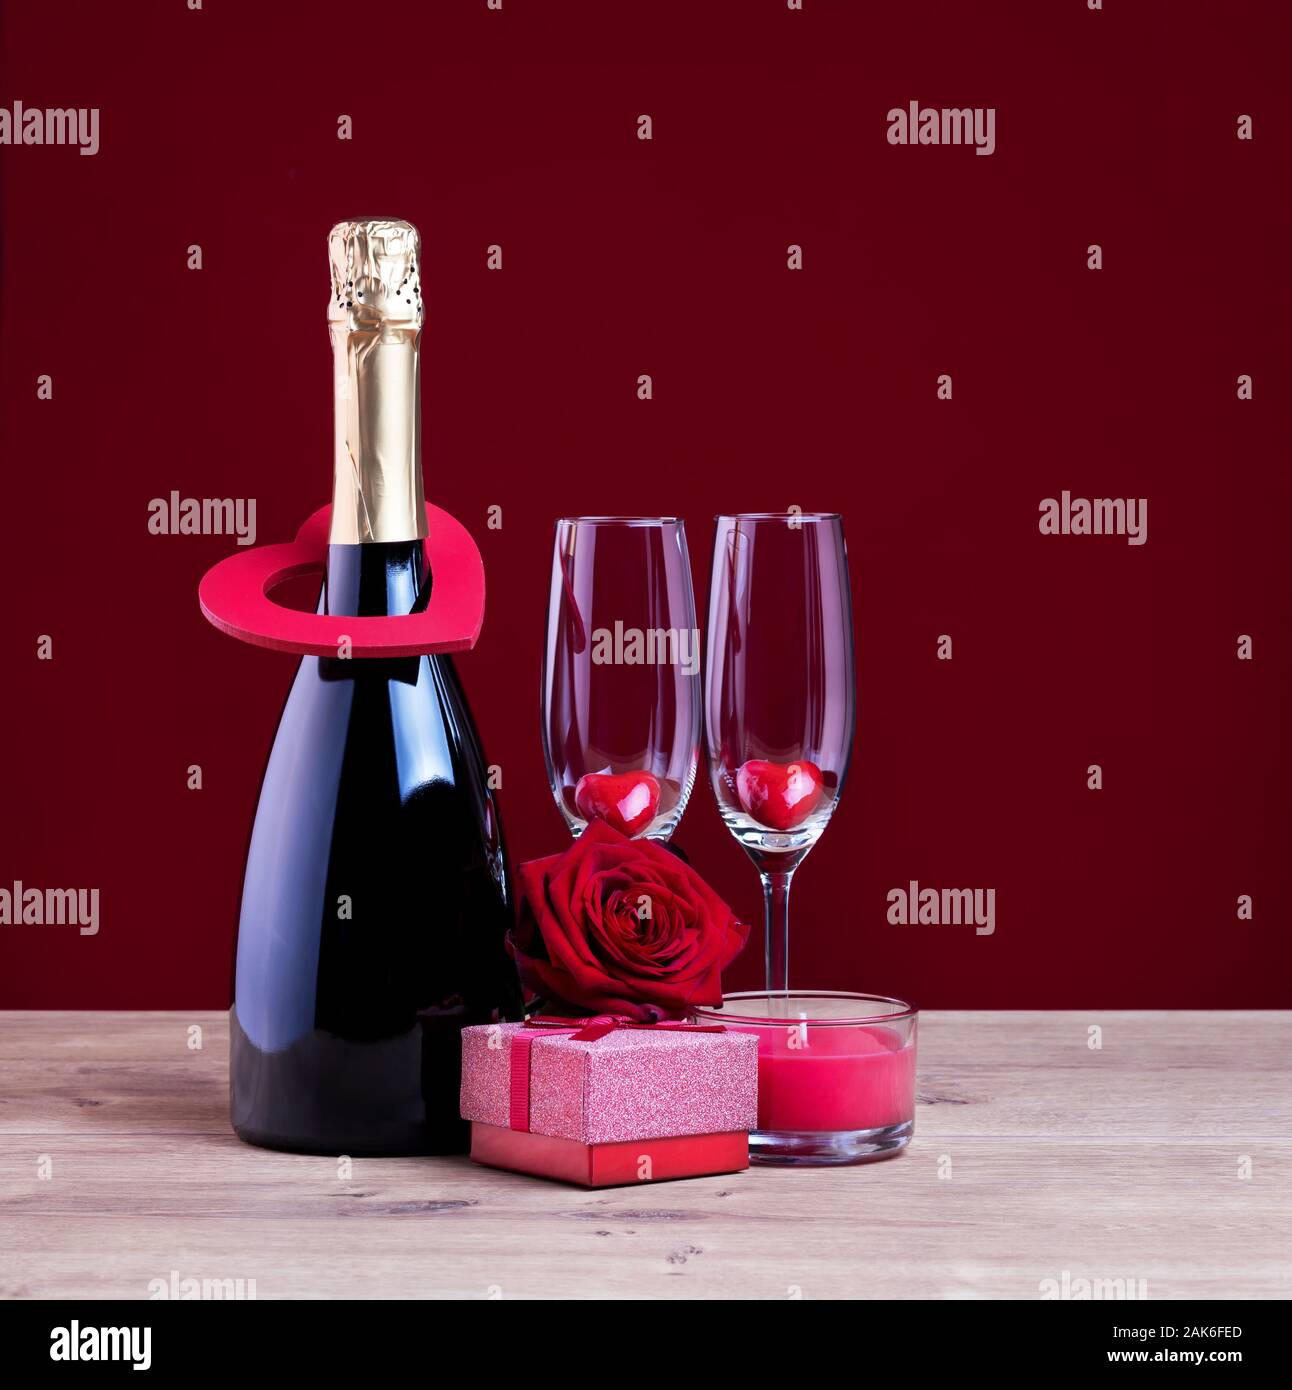 Greeting card for Womens or Mothers day. Valentines day concept with champagne glasses candle and hearts. Stock Photo